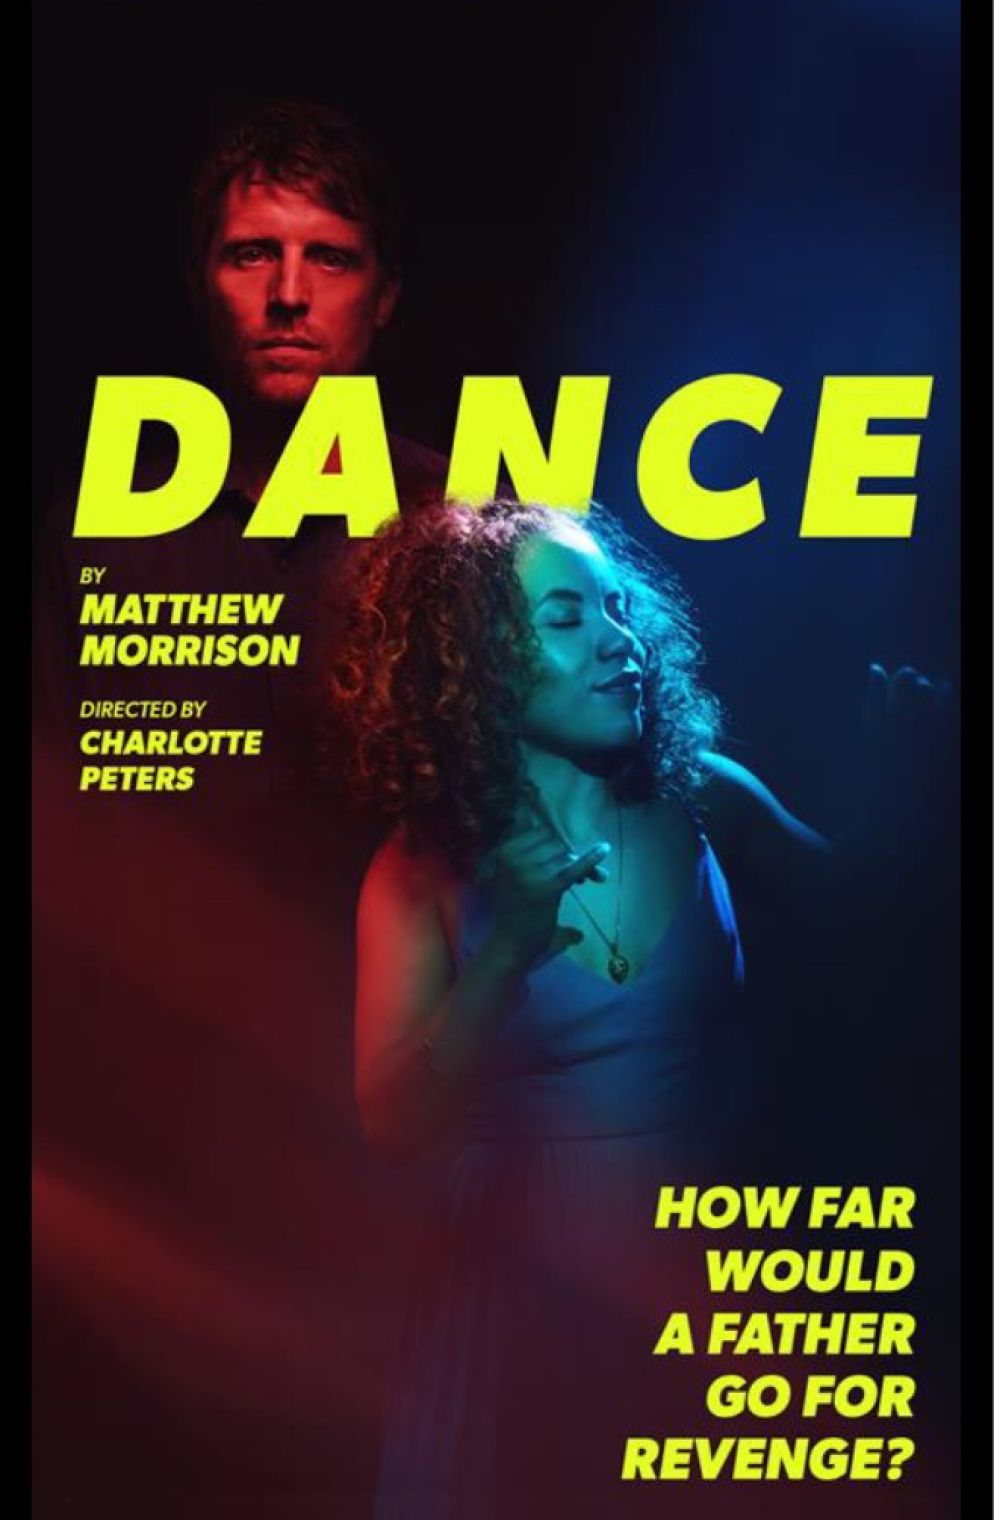 Saffron Coomber stars in new play 'Dance' at The Kings Head